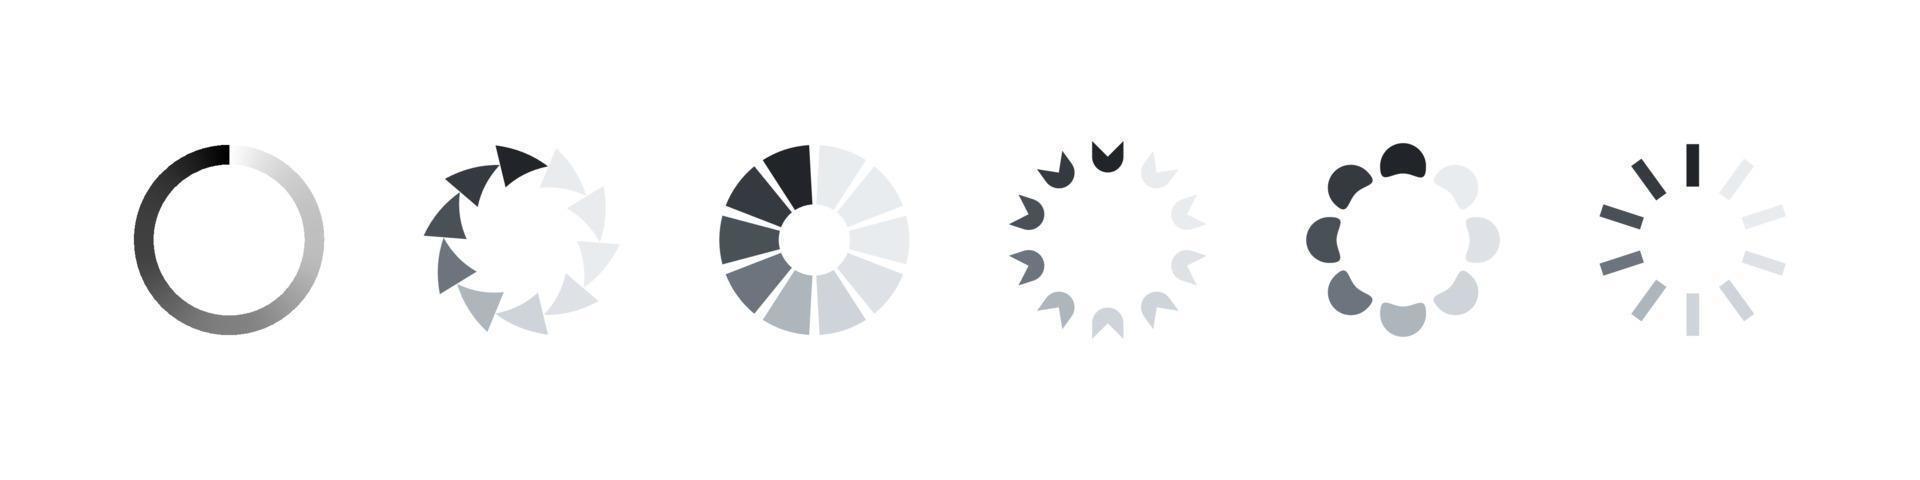 Loading icon. Loading bar. Loader icon circle button. Collection of simple web download. Vector illustration